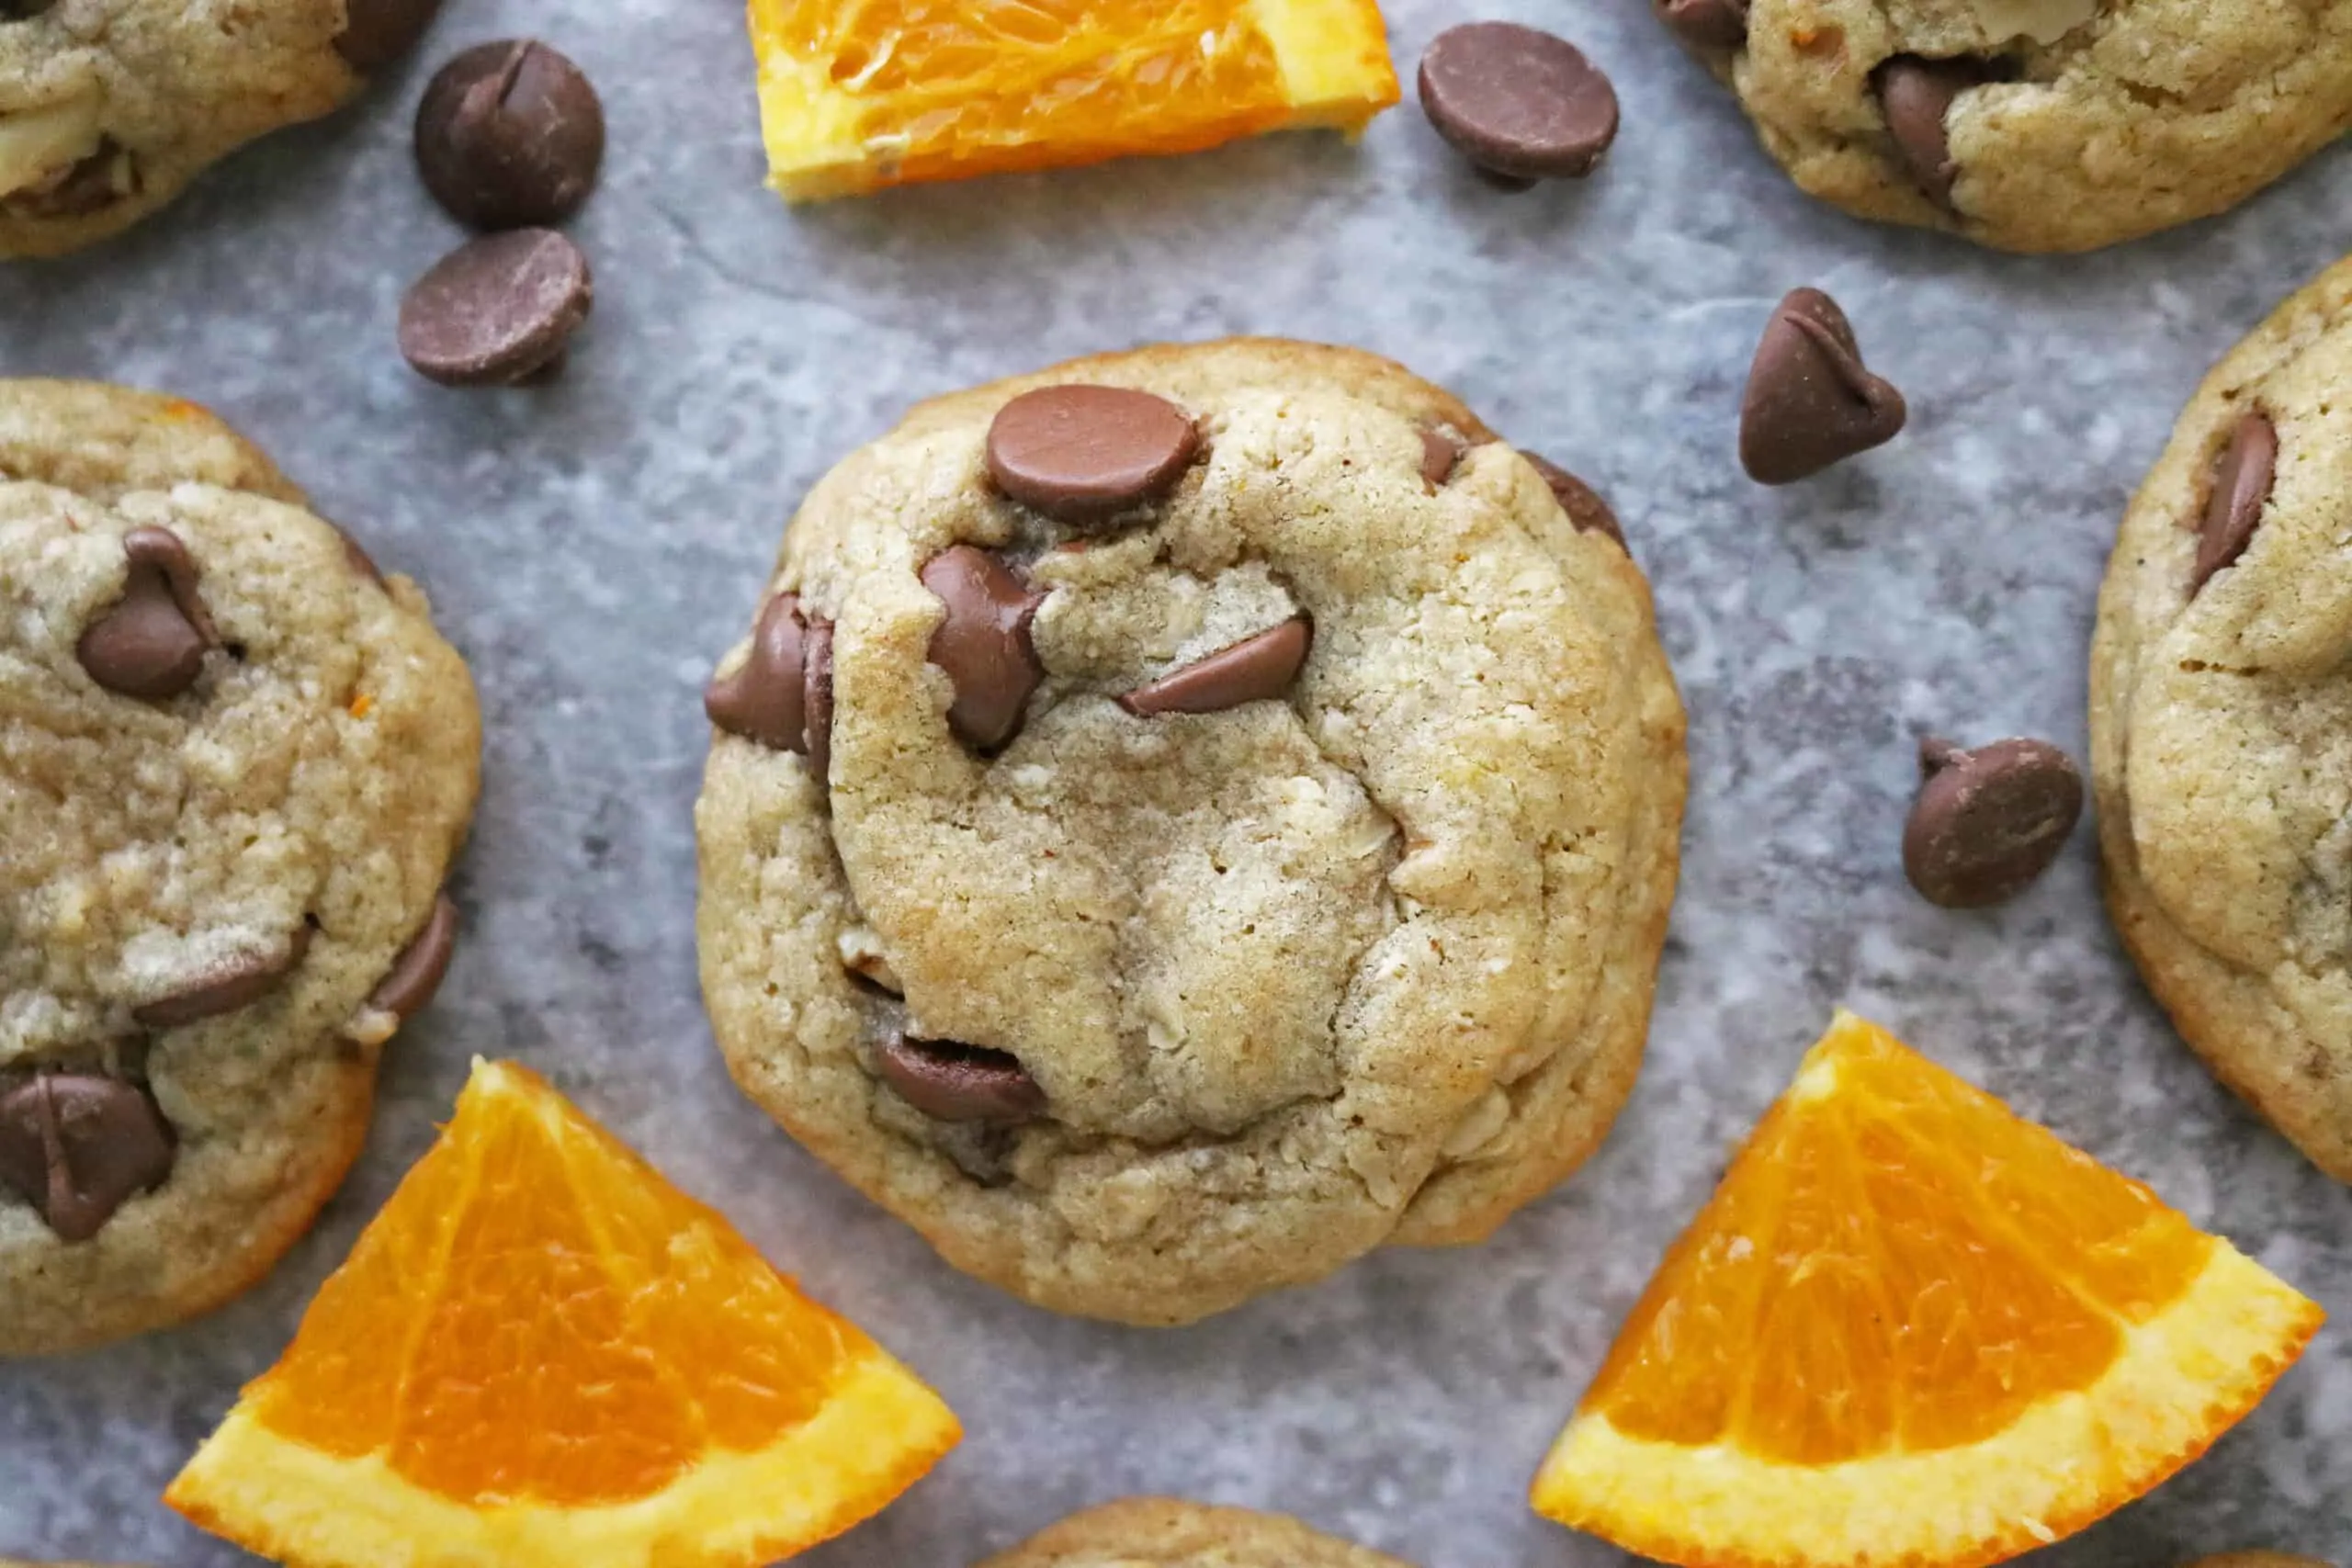 Easy and so delicious chocolate orange cookies ready to enjoy.